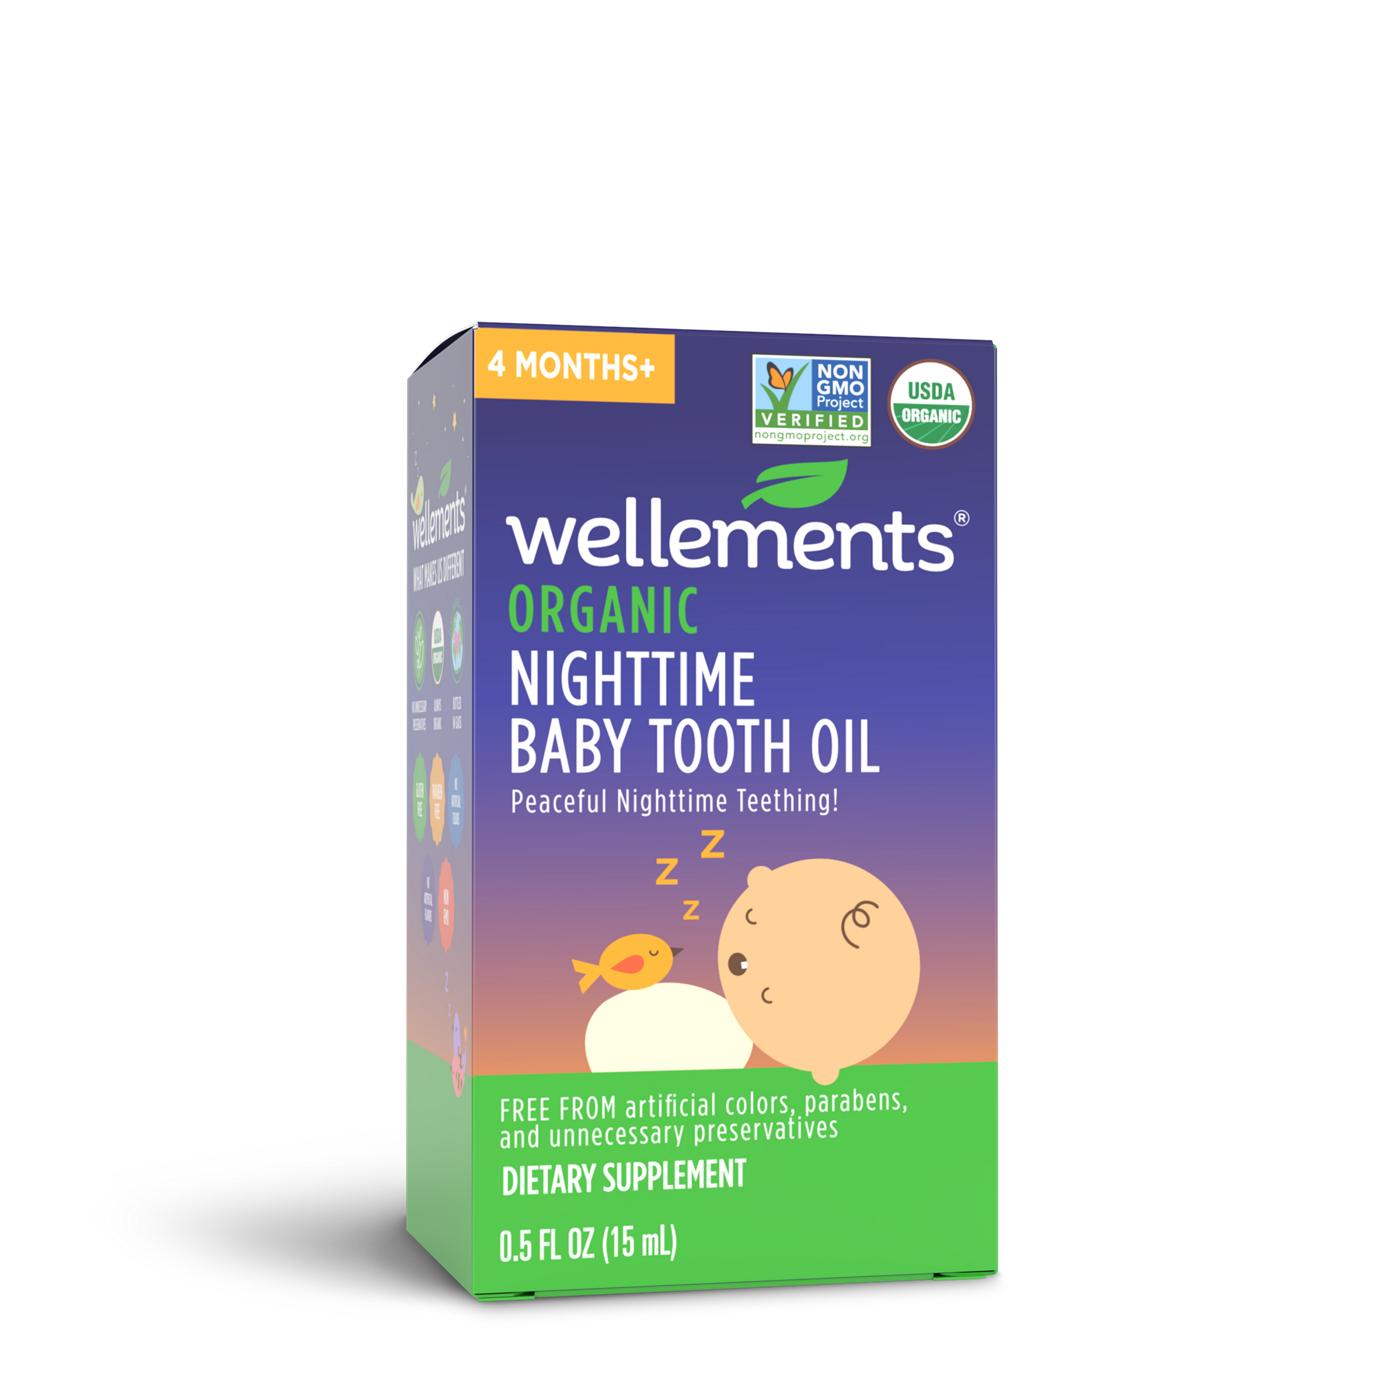 Wellements Organic Nighttime Baby Tooth Oil; image 1 of 4